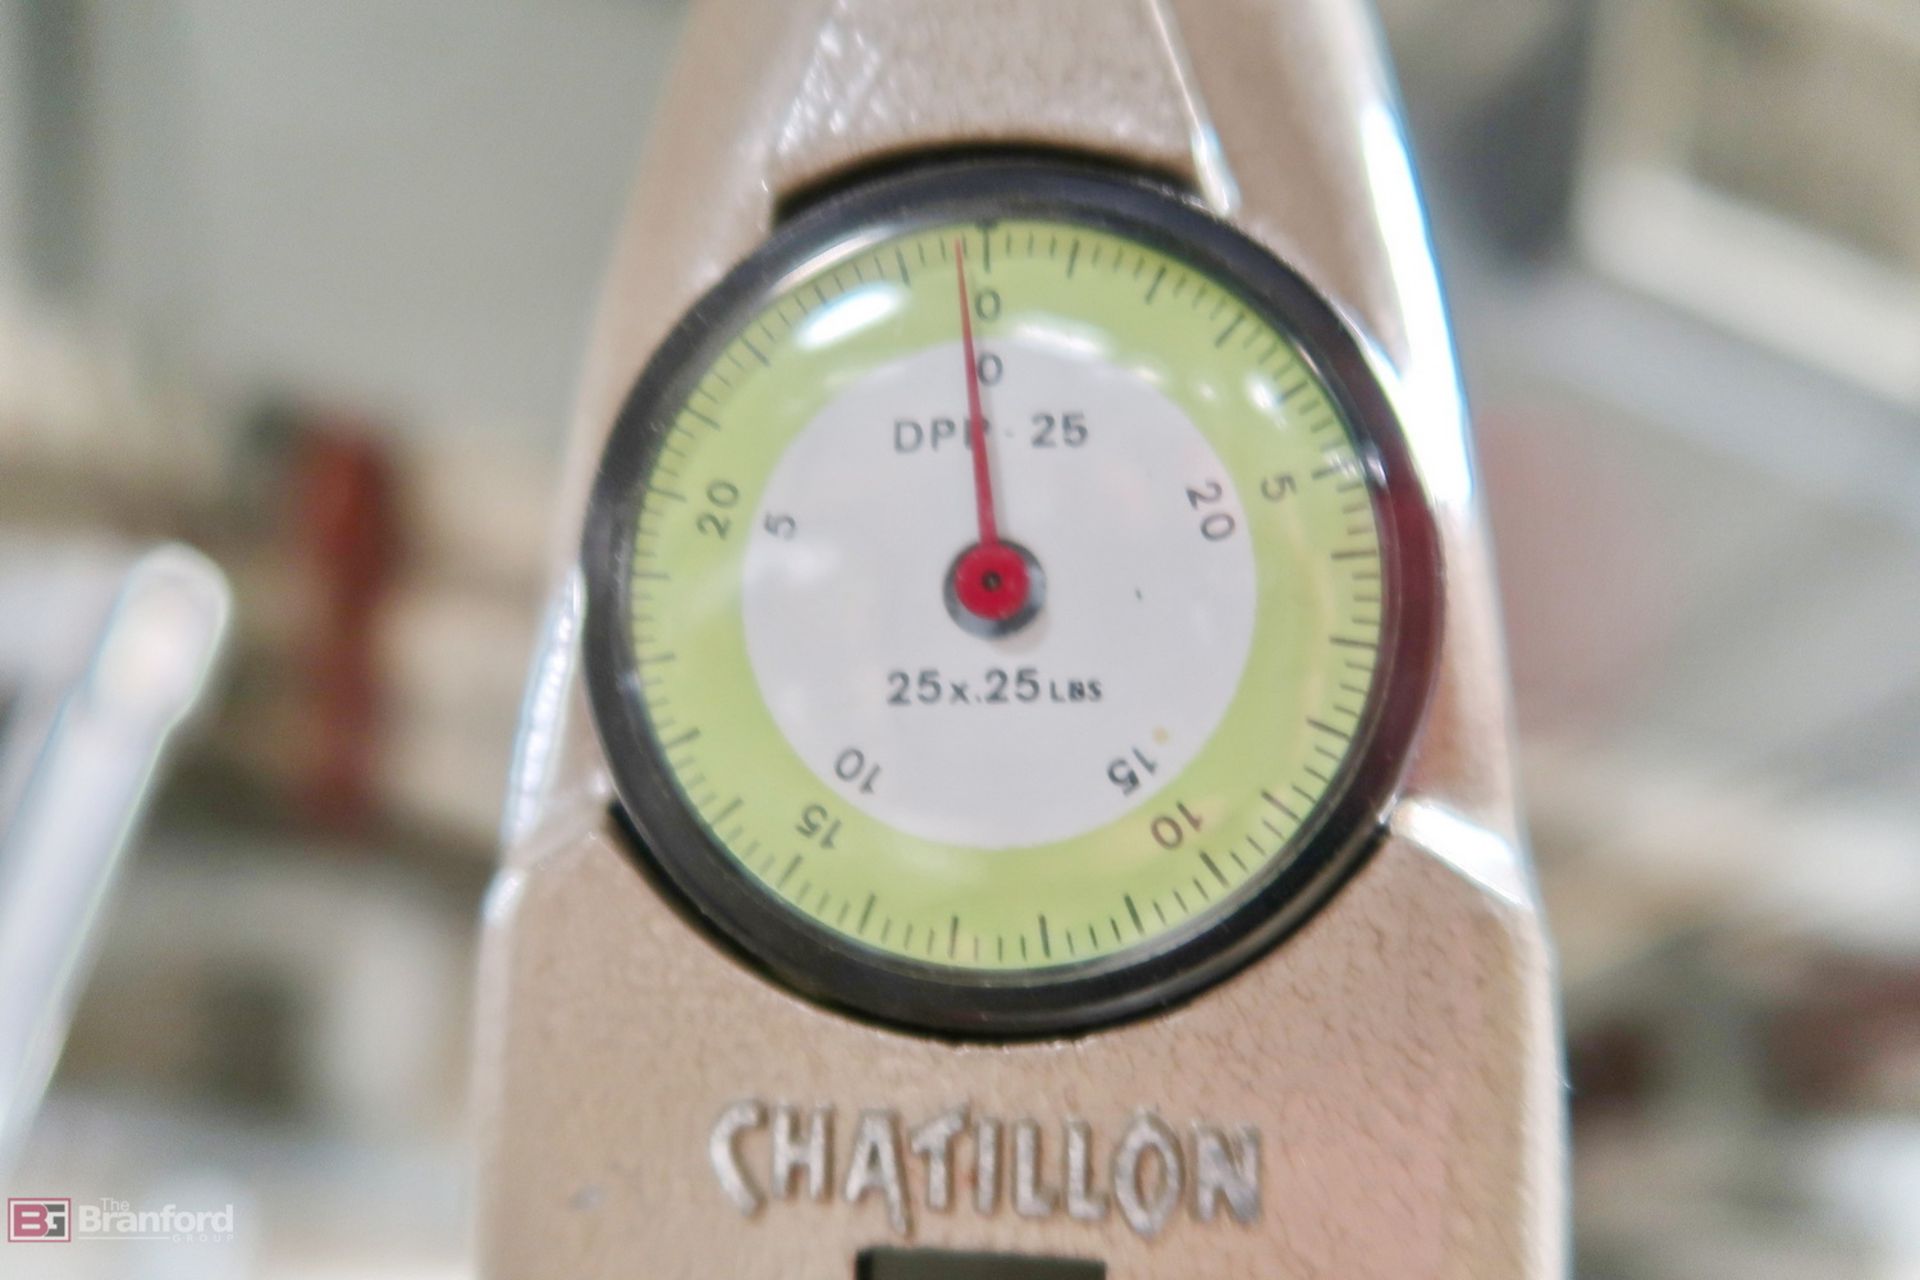 Chatillon force gauge w/ stand - Image 2 of 2